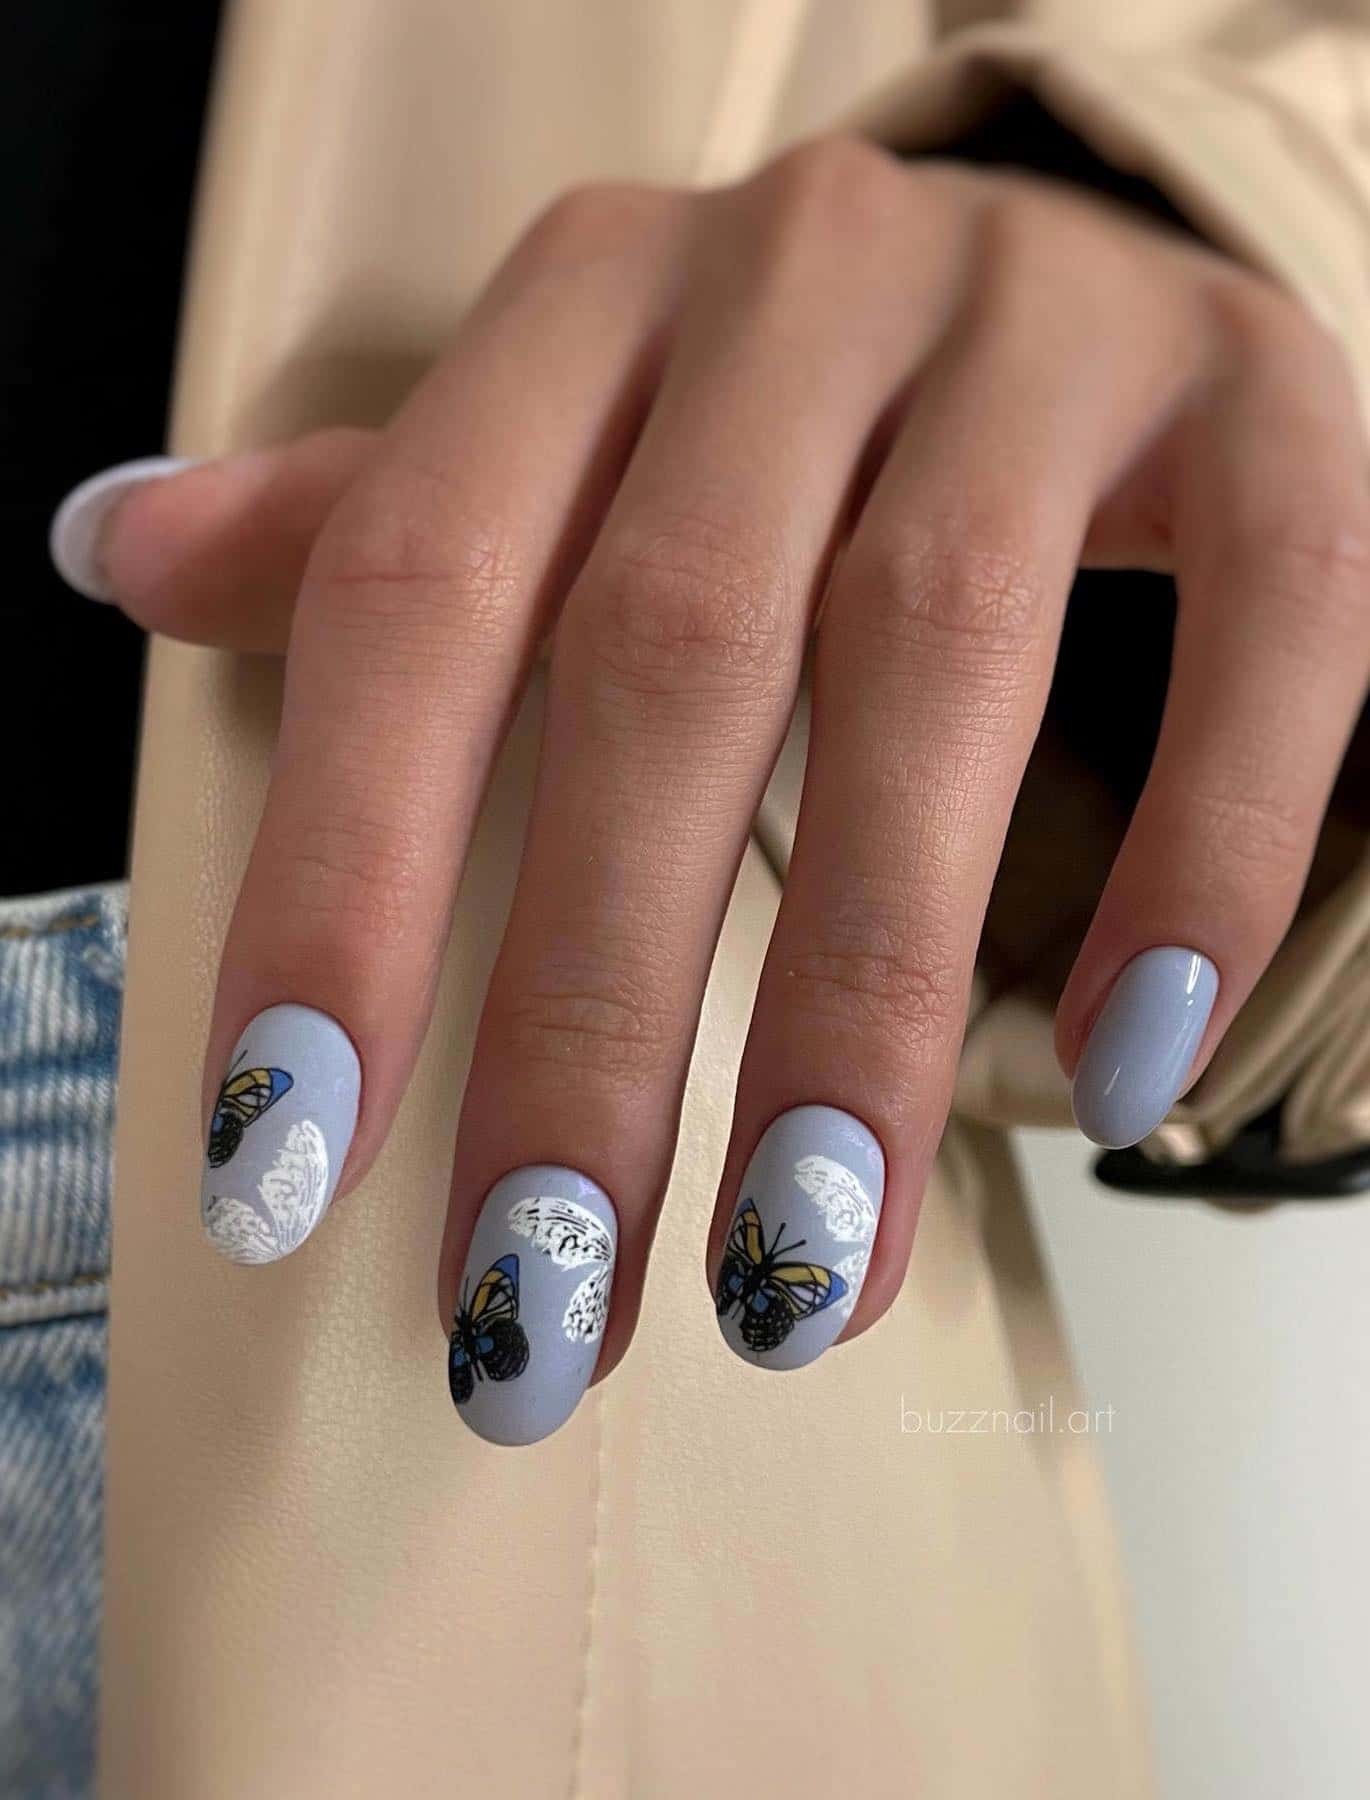 A hand with short round nails painted a light blue with white butterflies and yellow and bright blue butterflies